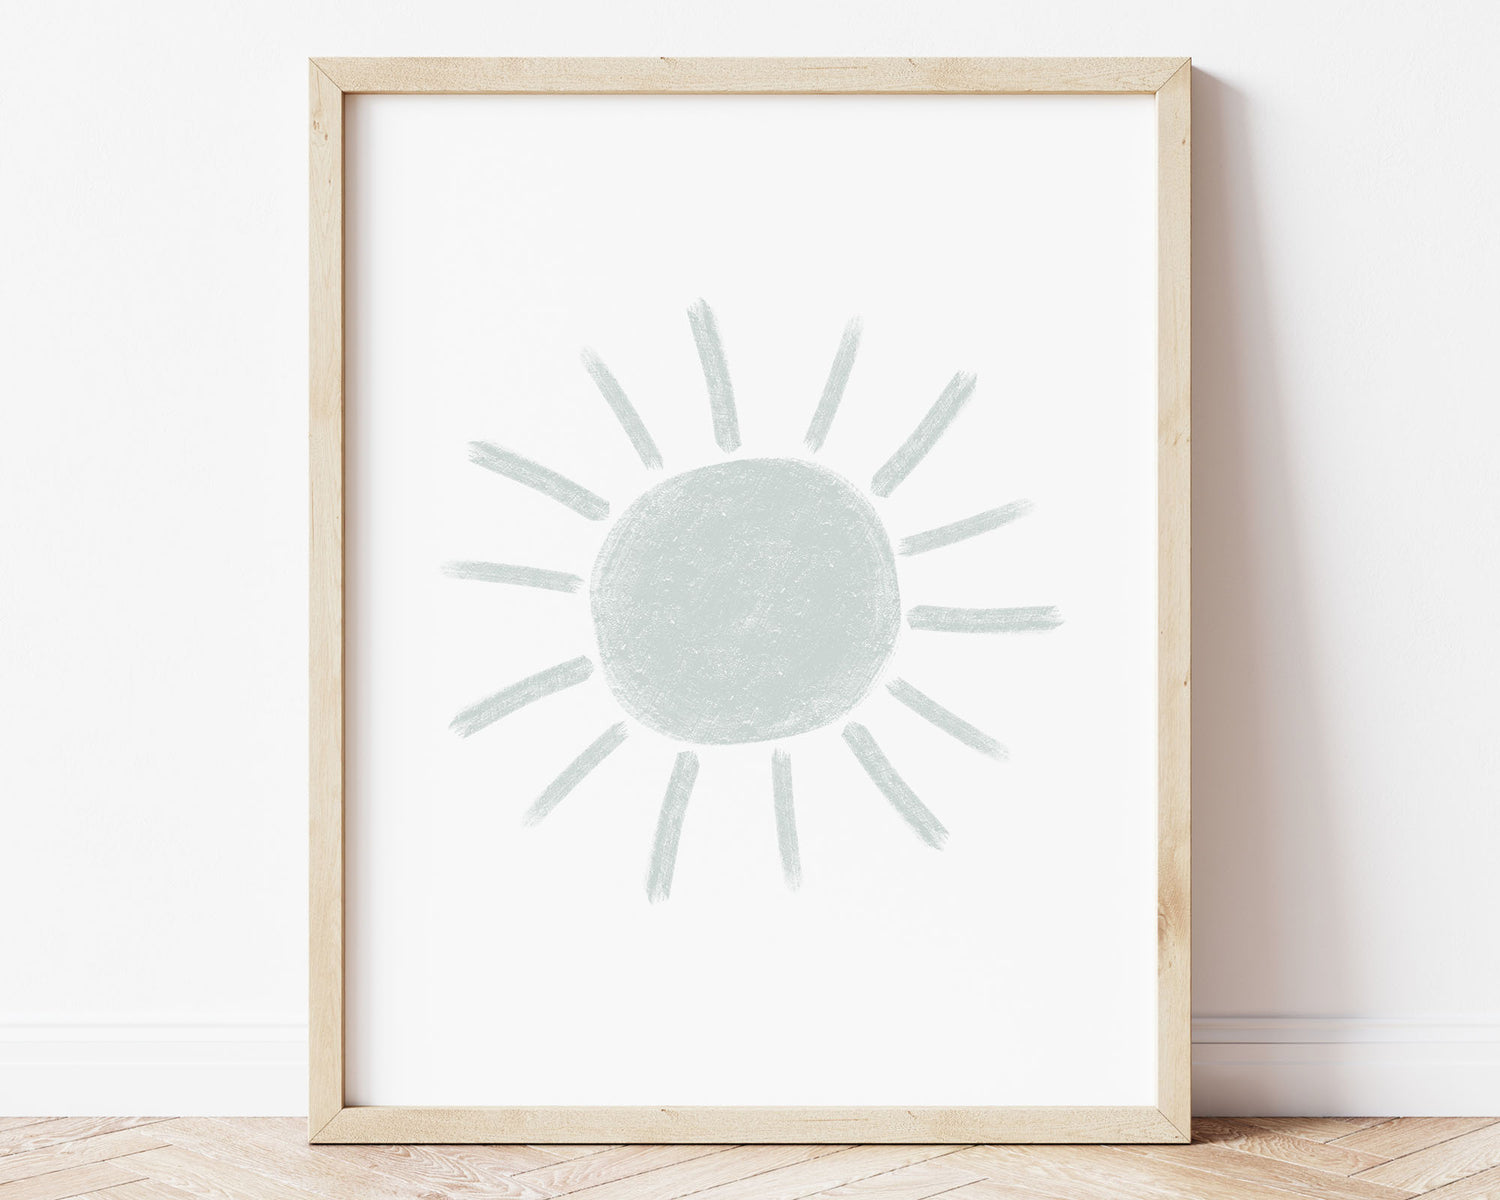 Muted pastel blue abstract sun in chalky brushstroke illlustration style perfect for Baby Nursery Décor, Little Boys Bedroom Wall Art, Toddler Girls Room Wall Hangings, Kiddos Bathroom Wall Art and Childrens Playroom Décor.